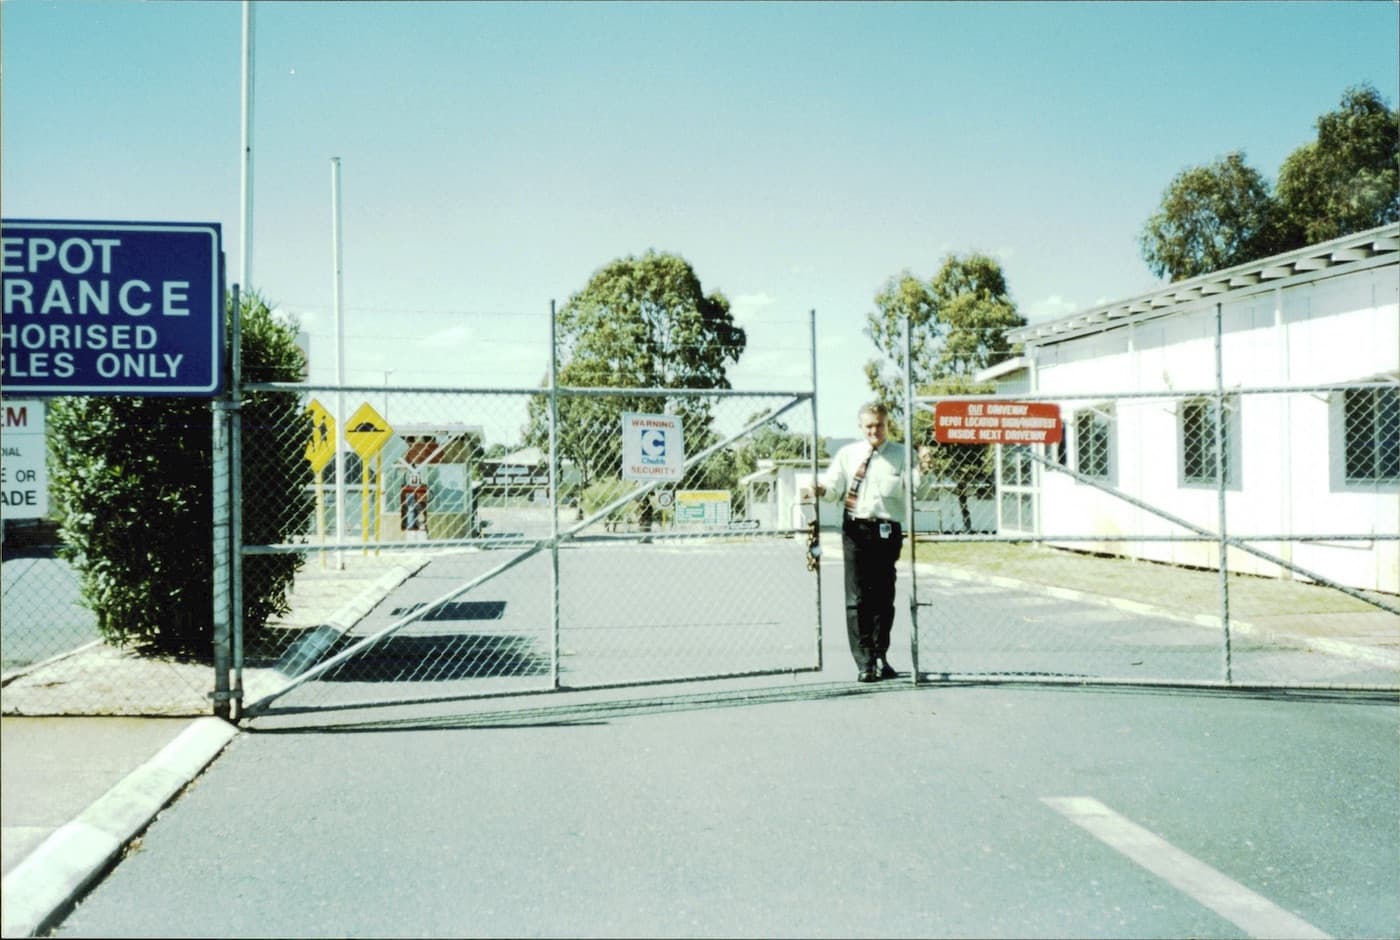 Gates of the Carlisle Depot close for the last time on 17 September 1999